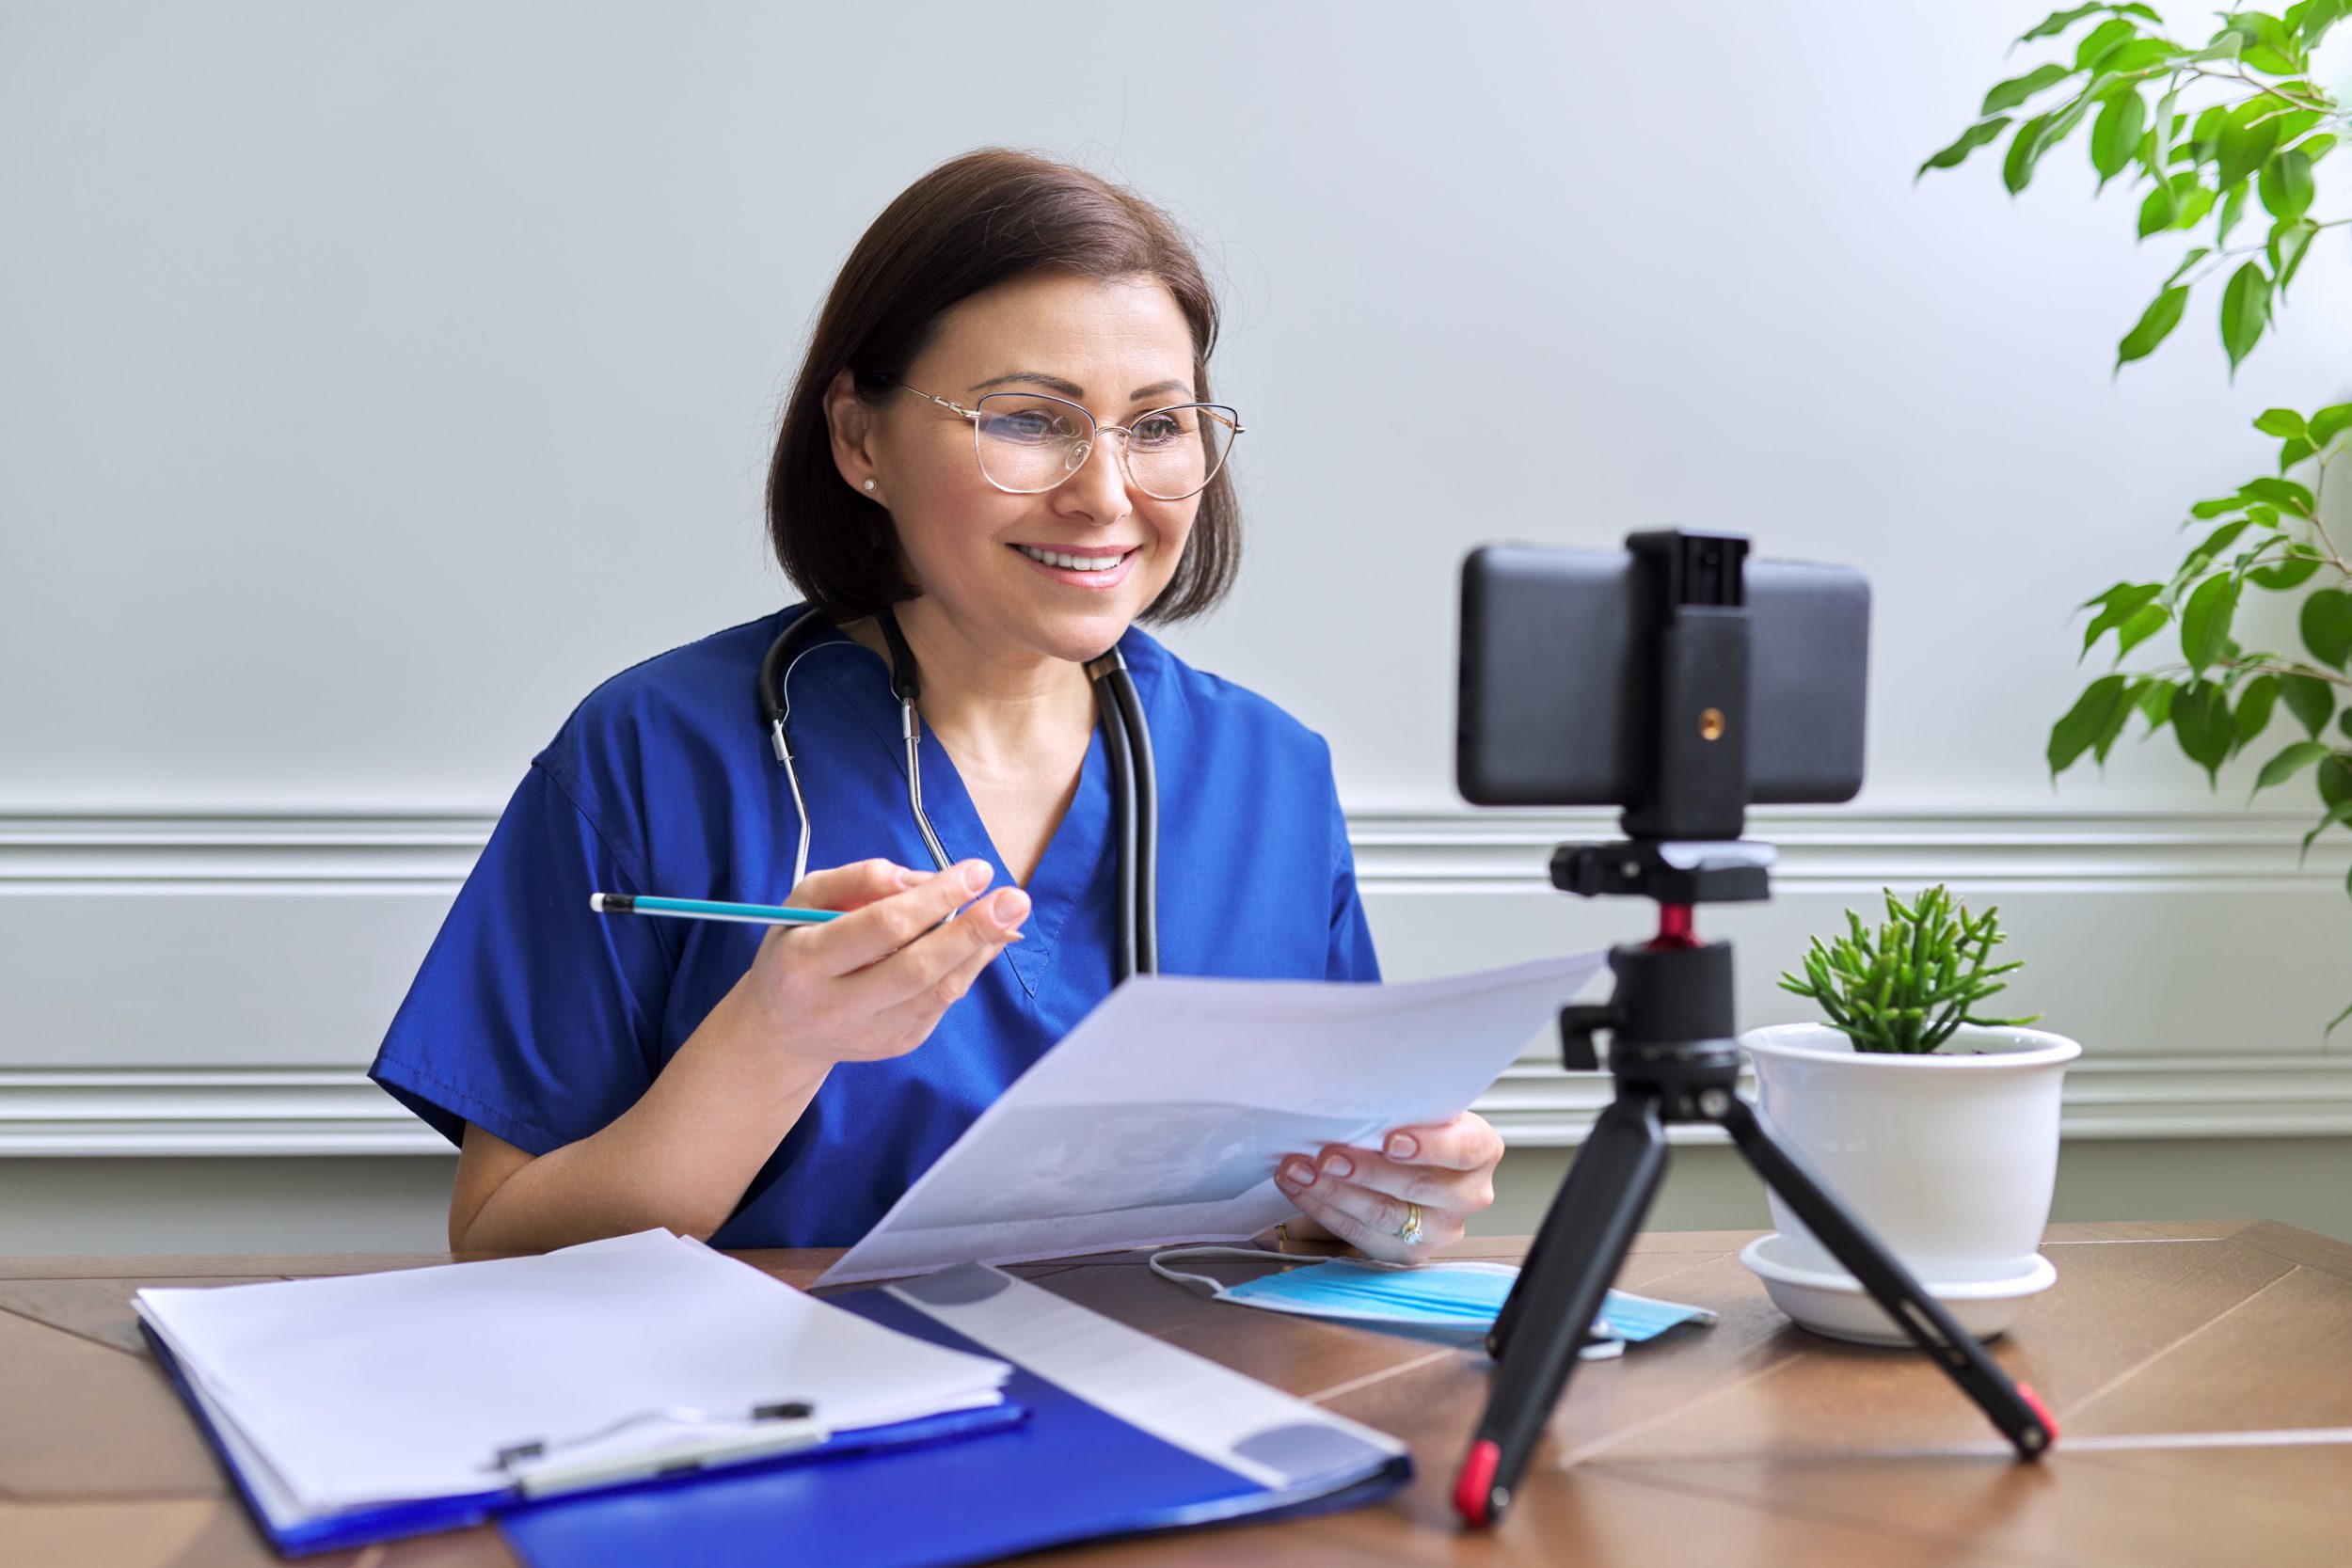 Online doctor consultation, female specialist talking with patient using video call, smartphone on tripod, doctor with stethoscope looking at the phone's webcam. Virtual patient sitting